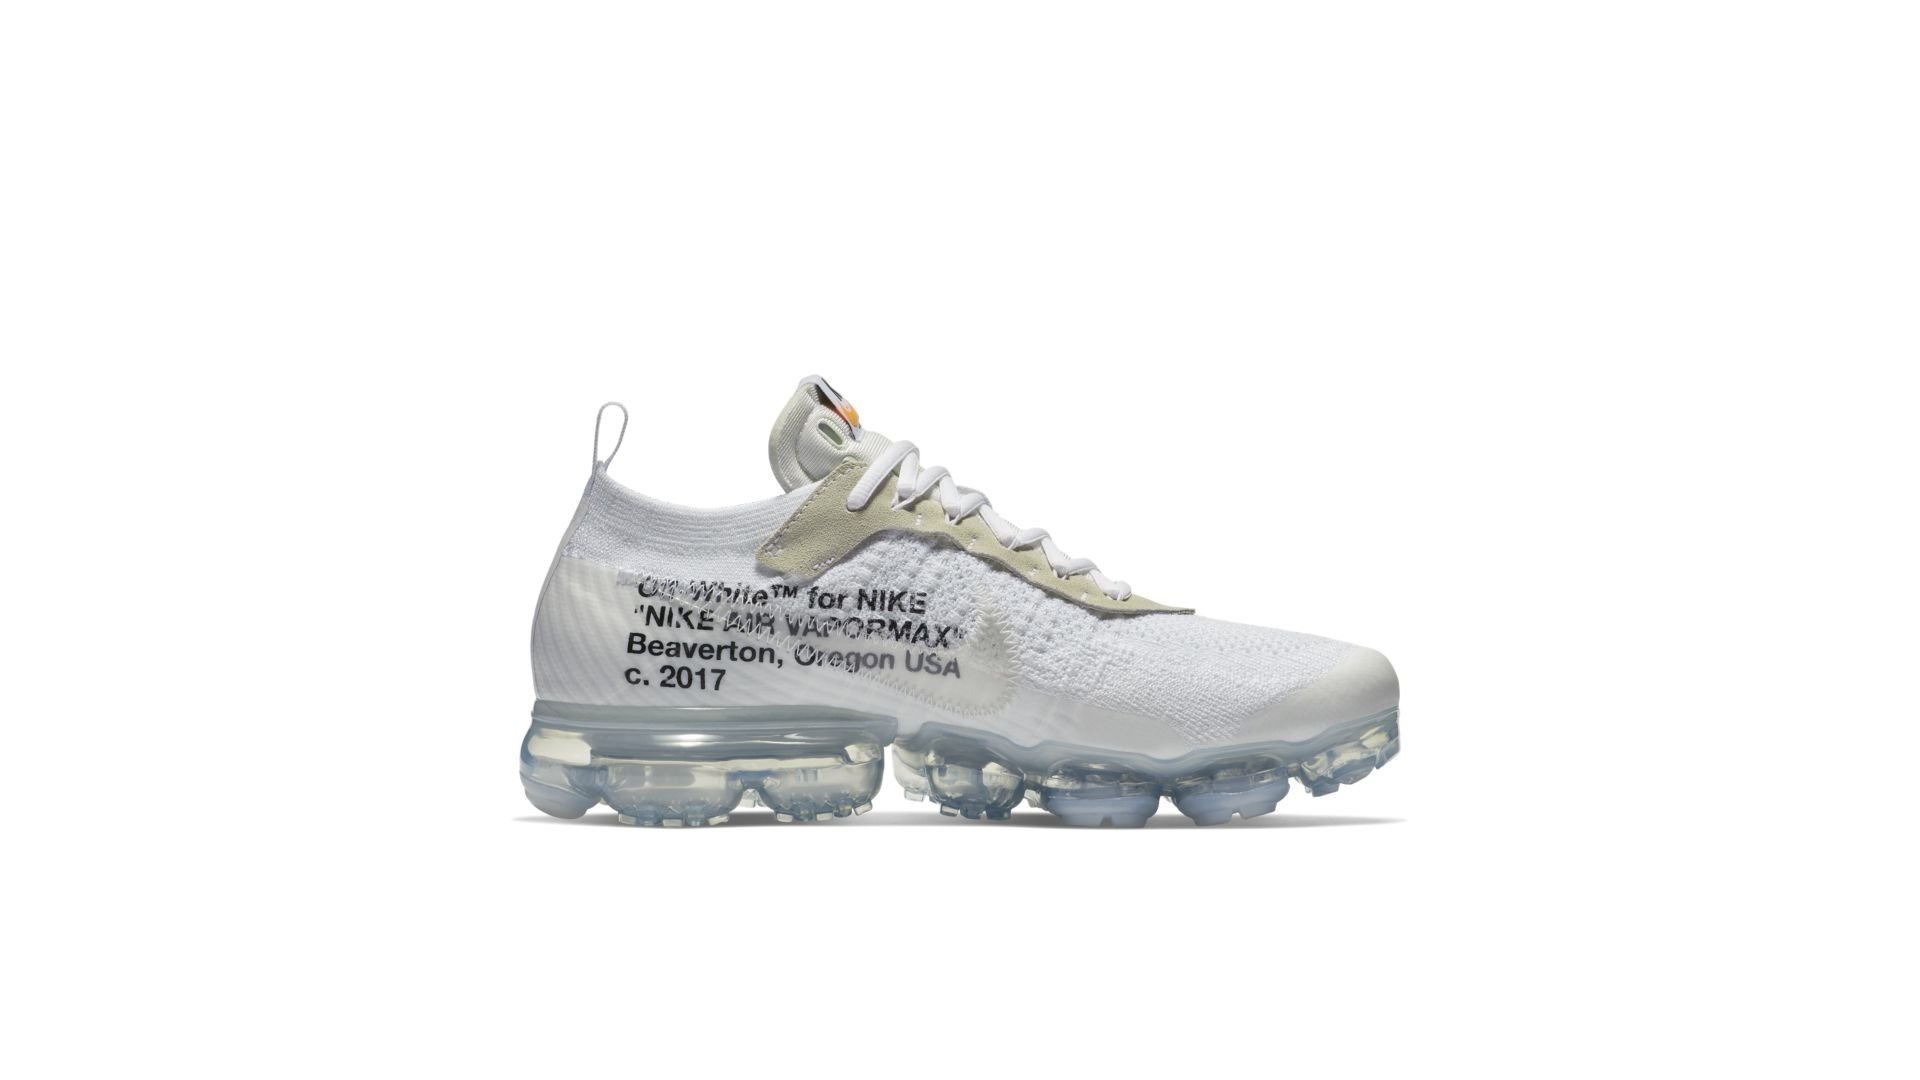 nike off white football boots